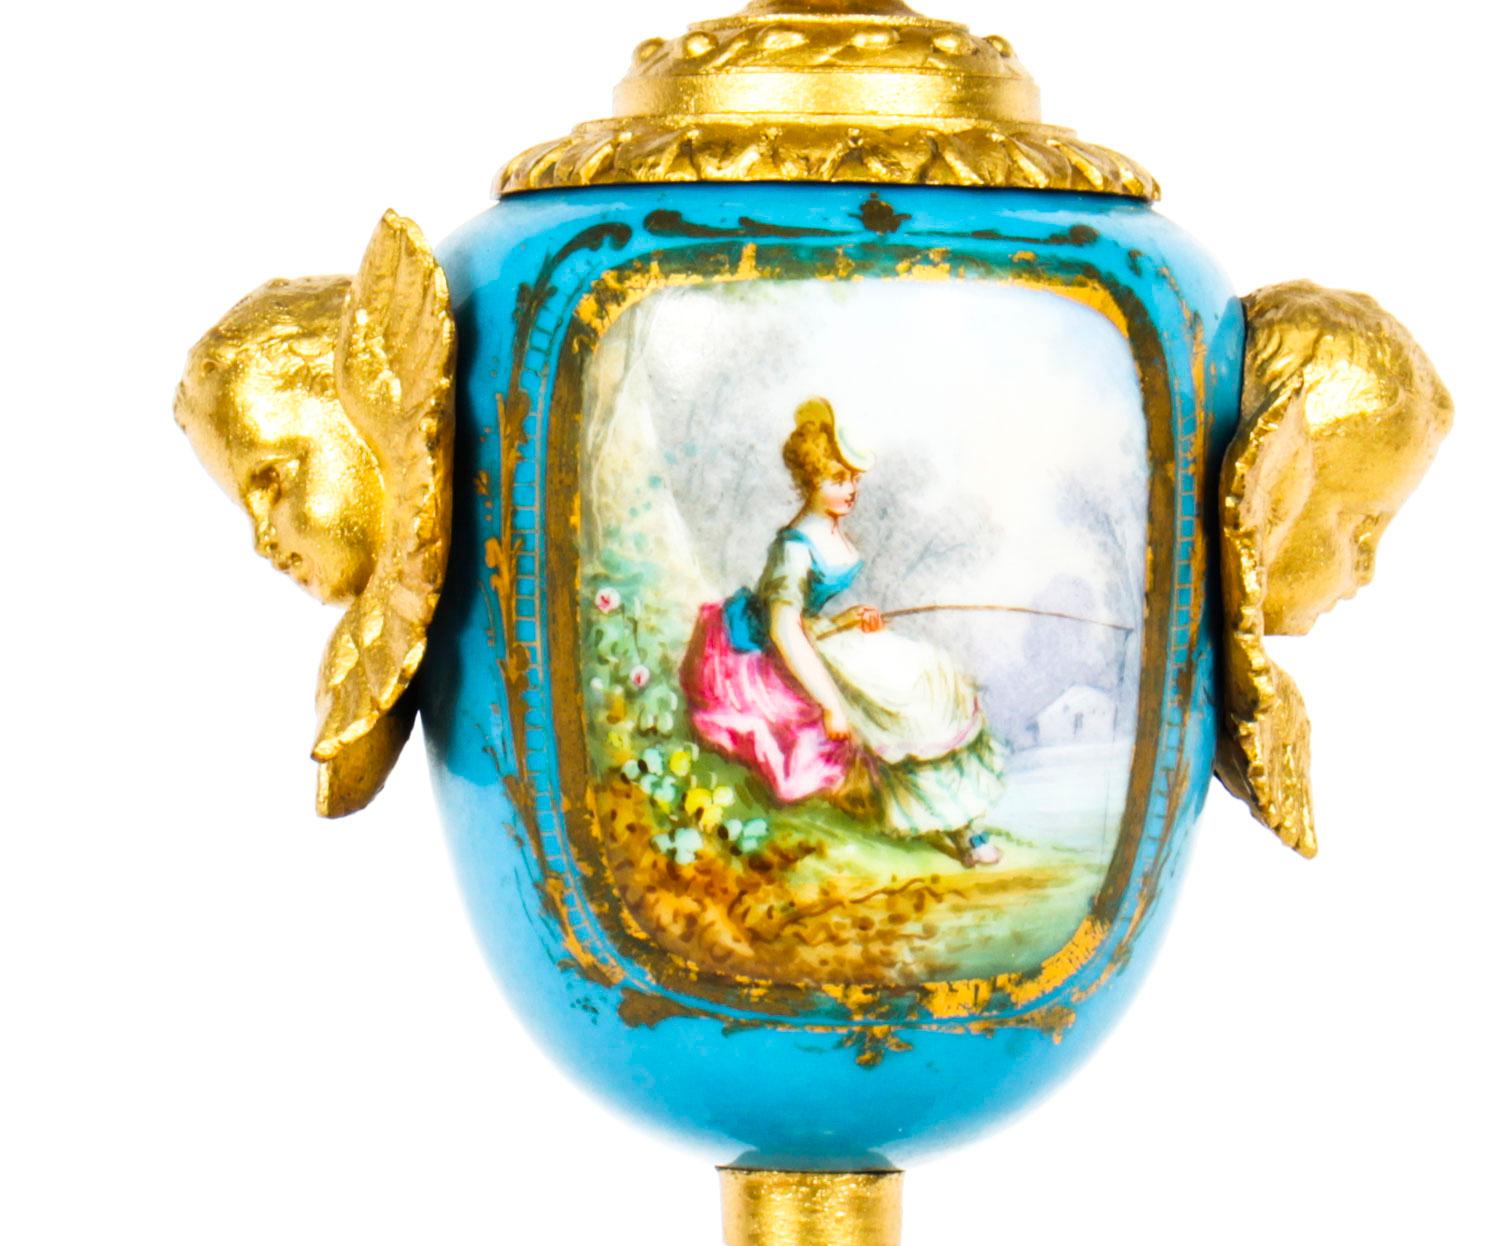 A fine quality French Sevres Porcelain gilded electric table lamp, circa 1870 in date.

The ovoid shaped body features hand painted socle support depicting a gentleman flute player on a celeste blue ground, ending on an ornate base decorated with